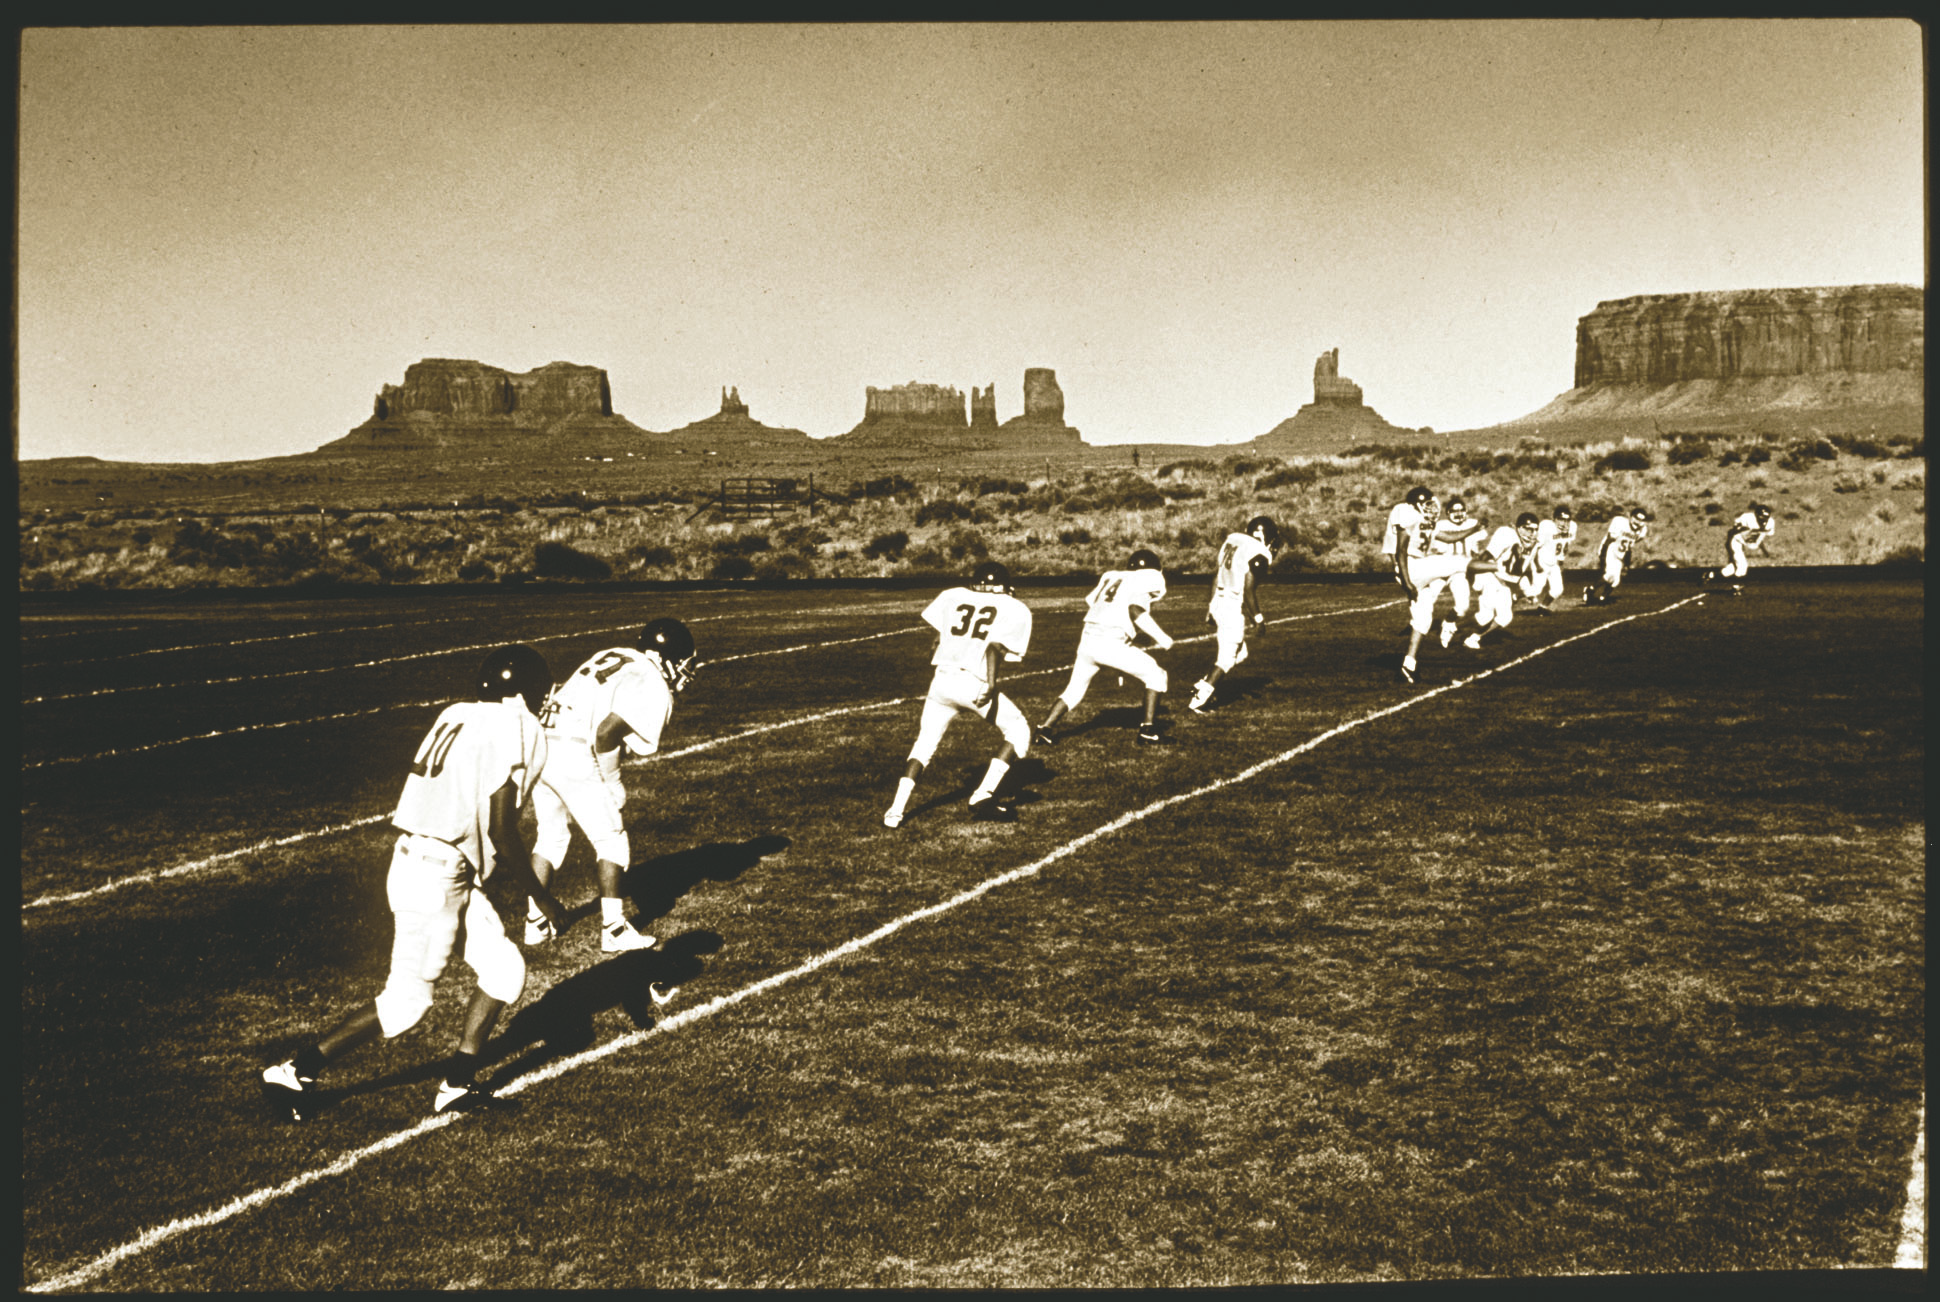 Members of the football team at Monument Valley High on the Navajo Reservation practice on their field with the famous buttes in the background. This is just north of the Arizona/Utah border. Alan Berner